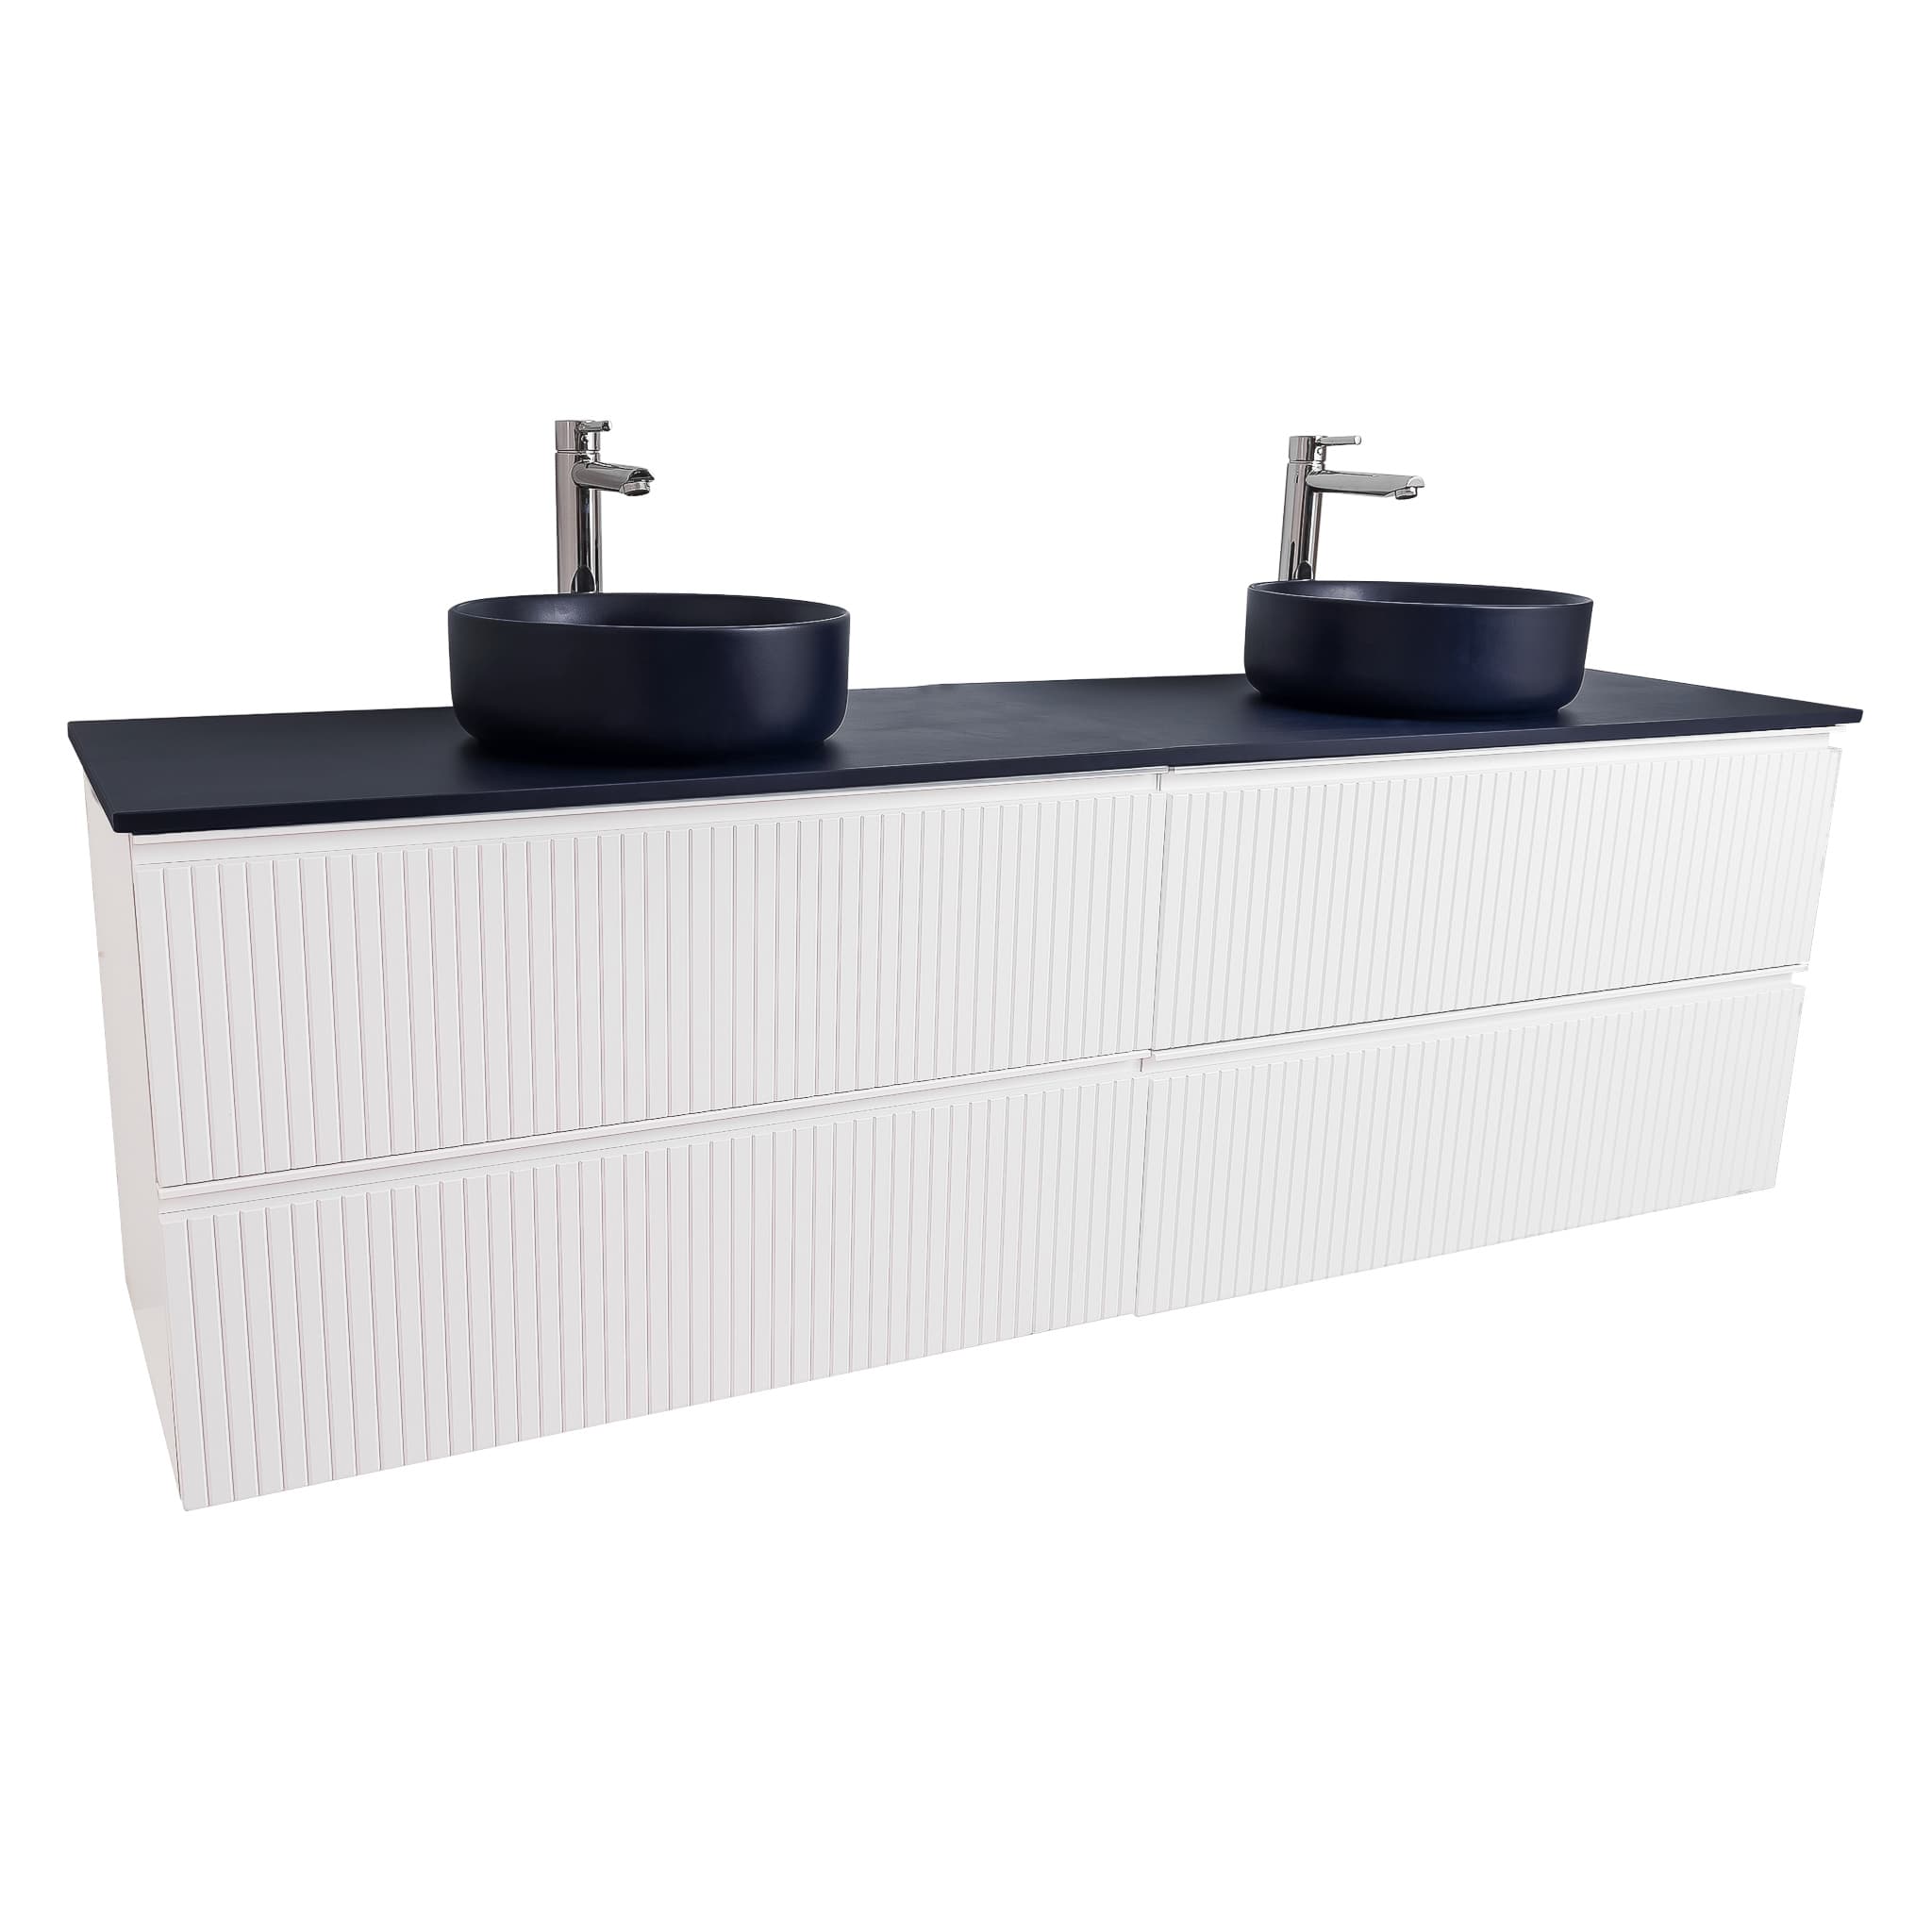 Ares 63 Matte White Cabinet, Ares Navy Blue Top And Two Ares Navy Blue Ceramic Basin, Wall Mounted Modern Vanity Set